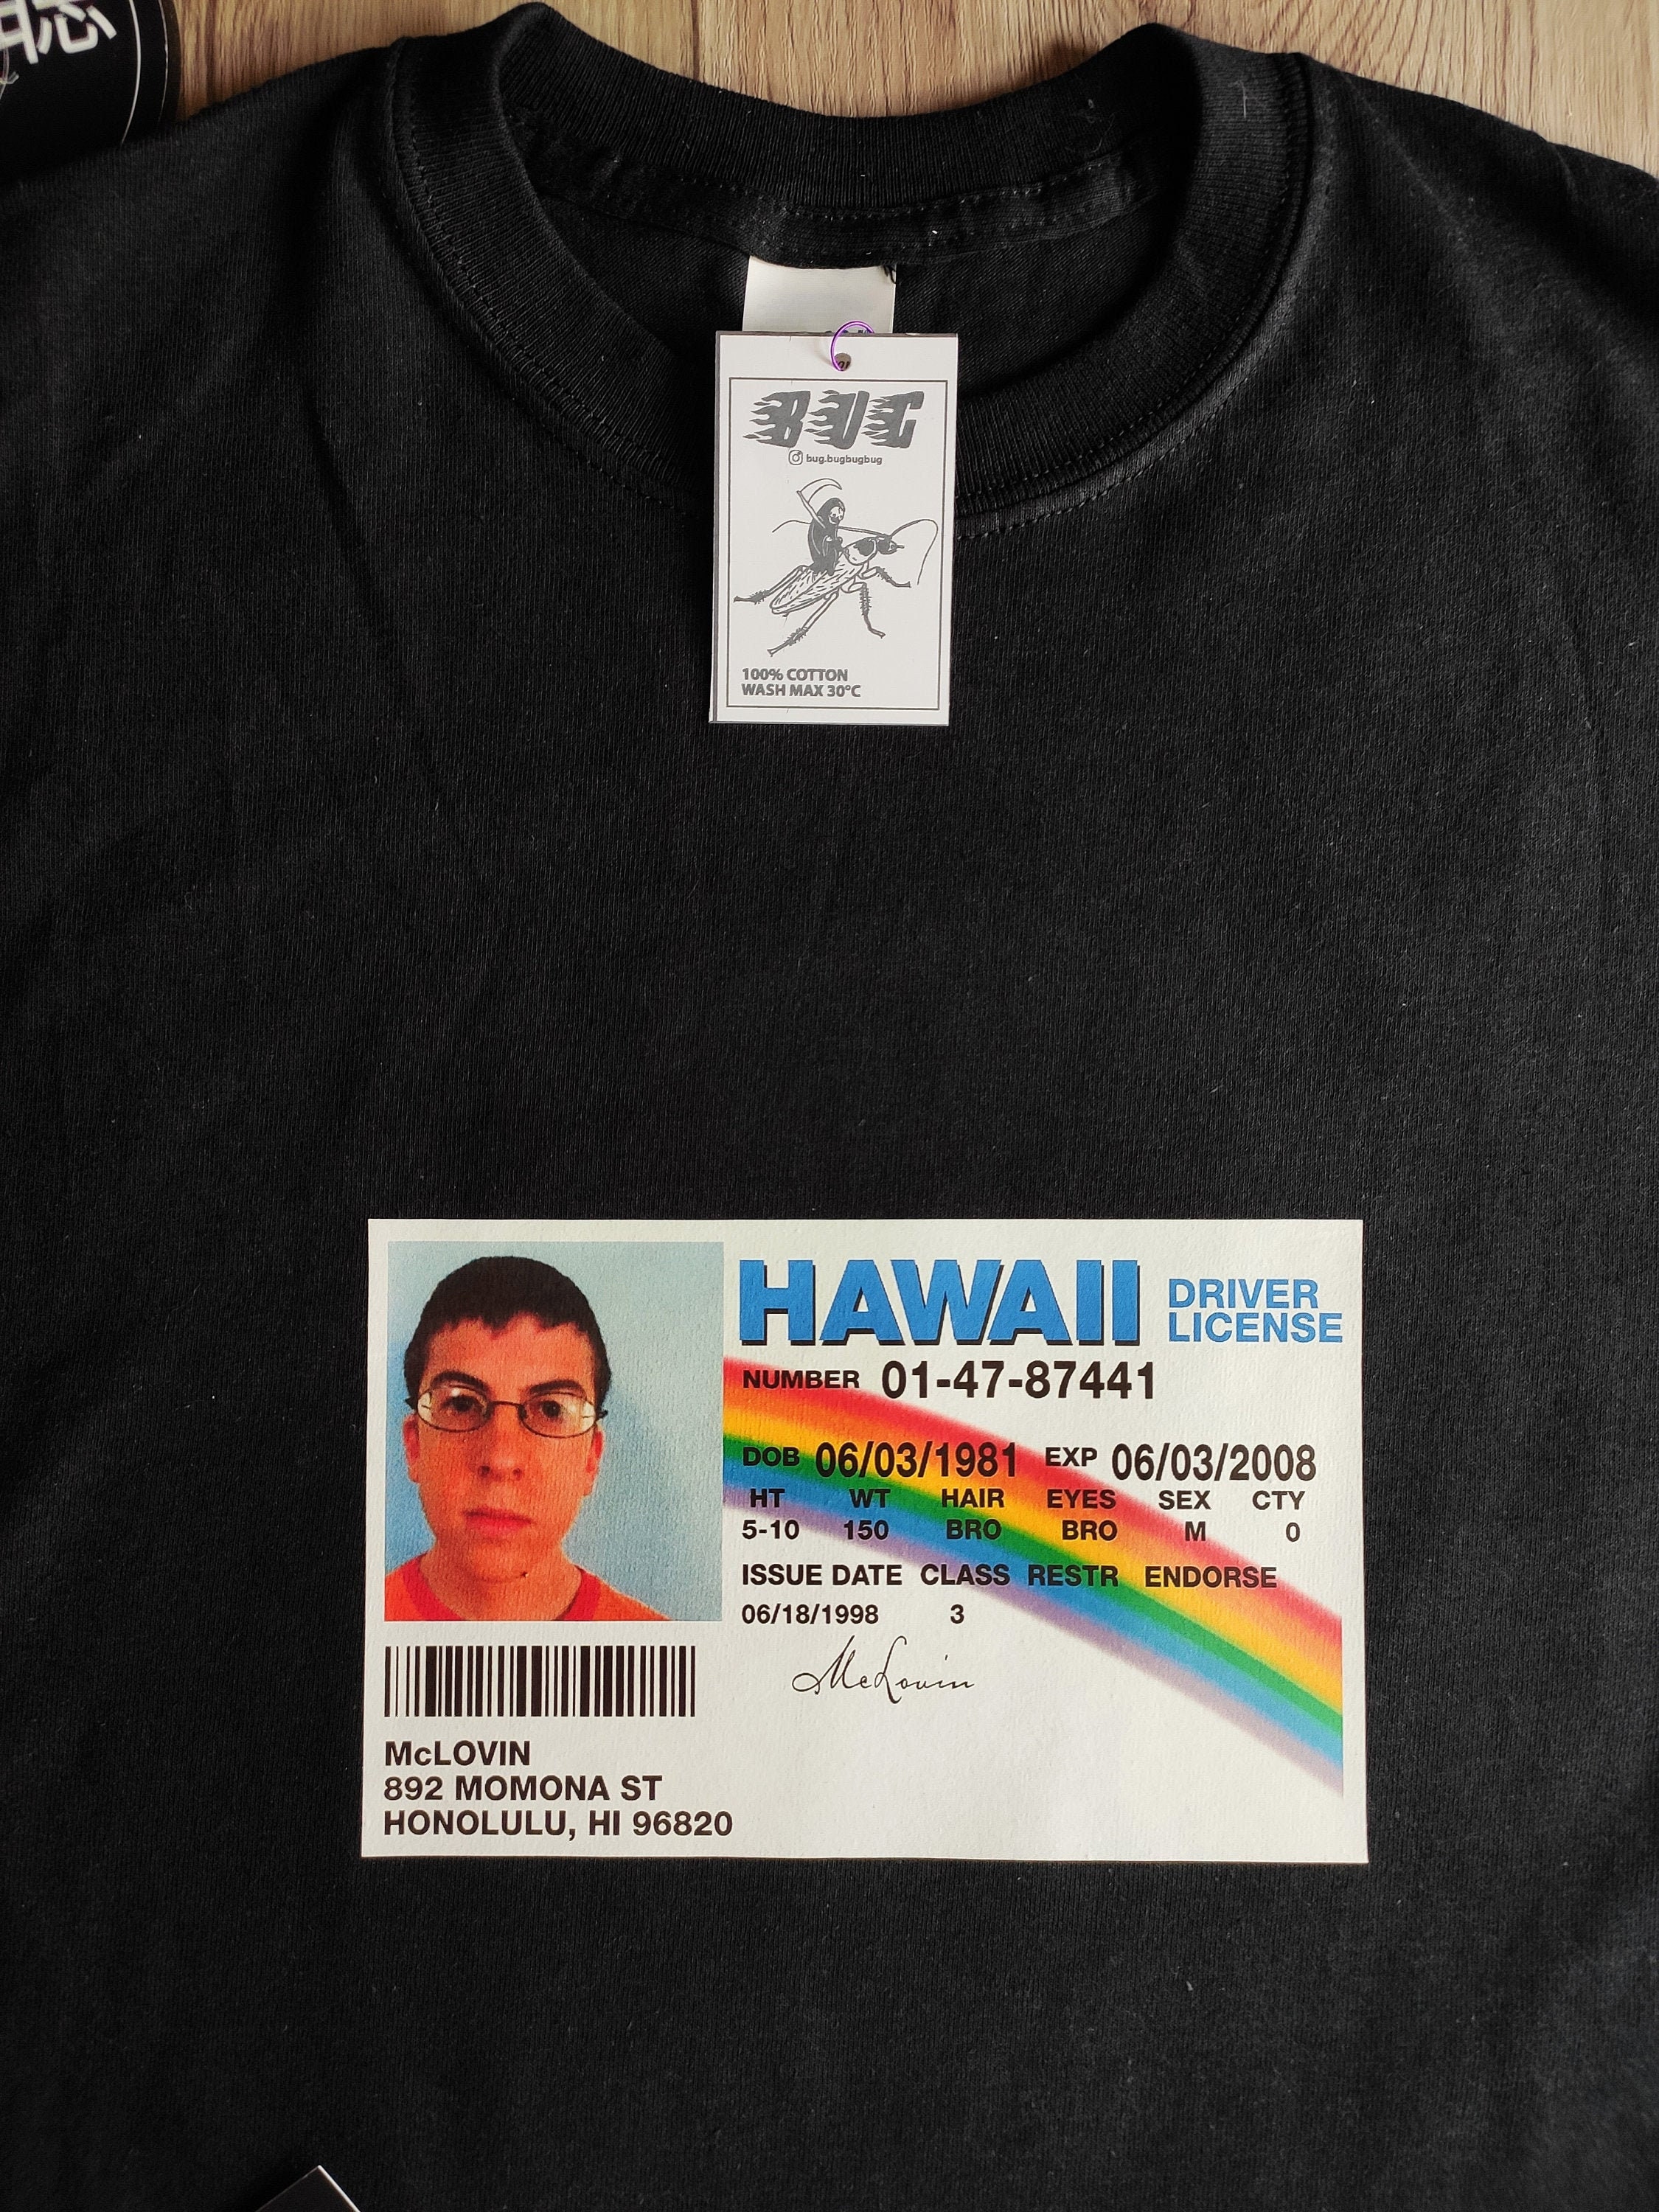 New Mclovin ID Driver License Shirt from Superbad Movie Graphic T-Shirt S-2XL 